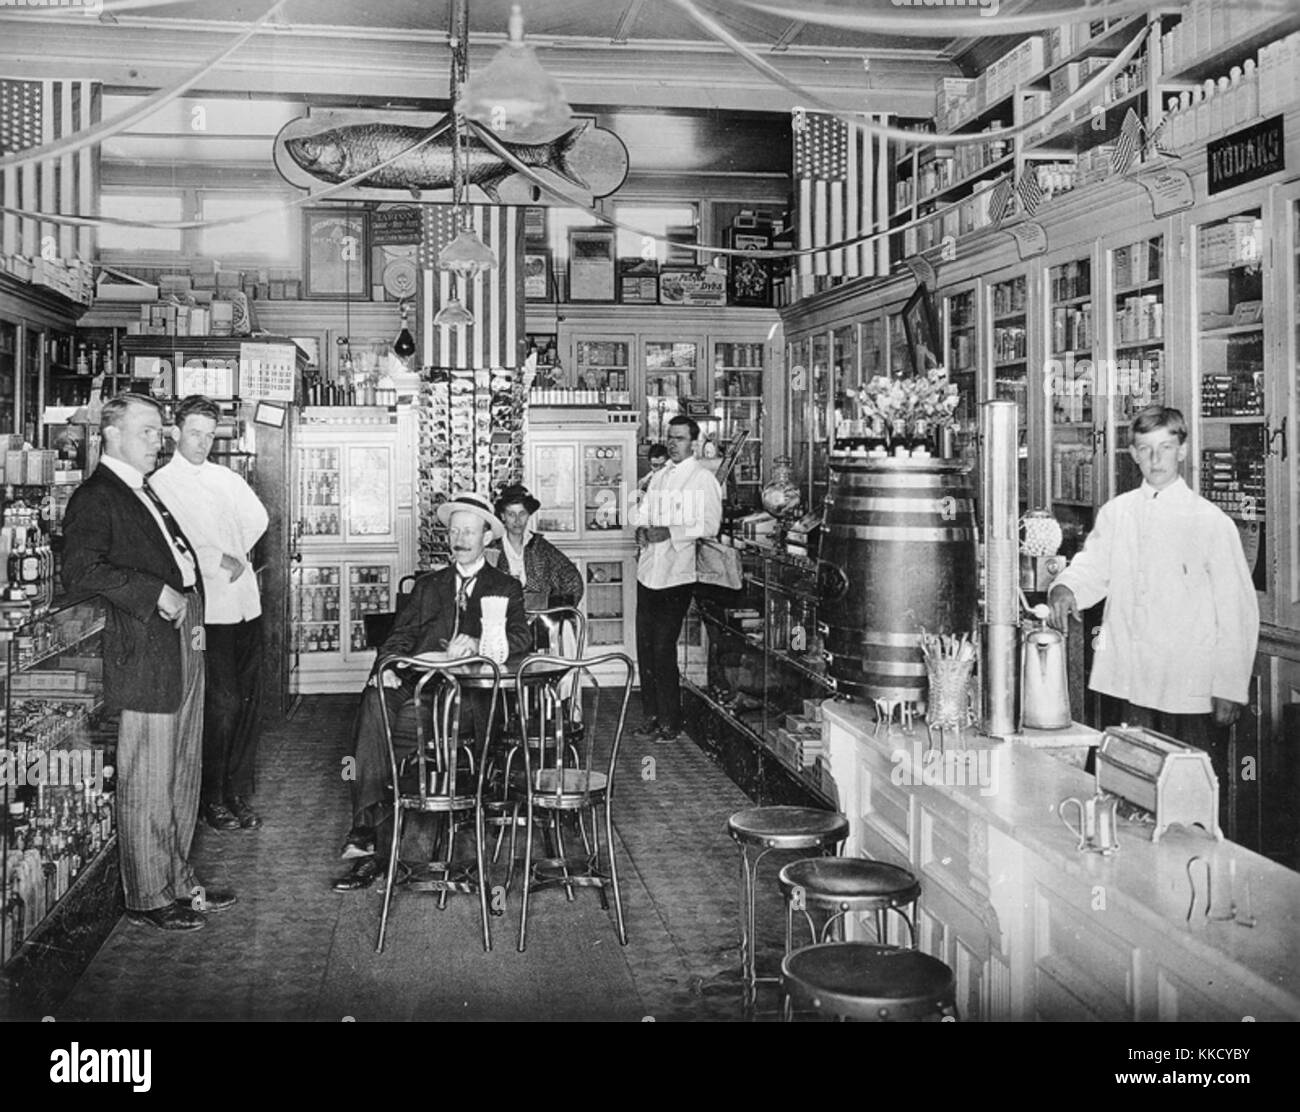 The Apothecary Shop Photograph by Robert Murray - Fine Art America